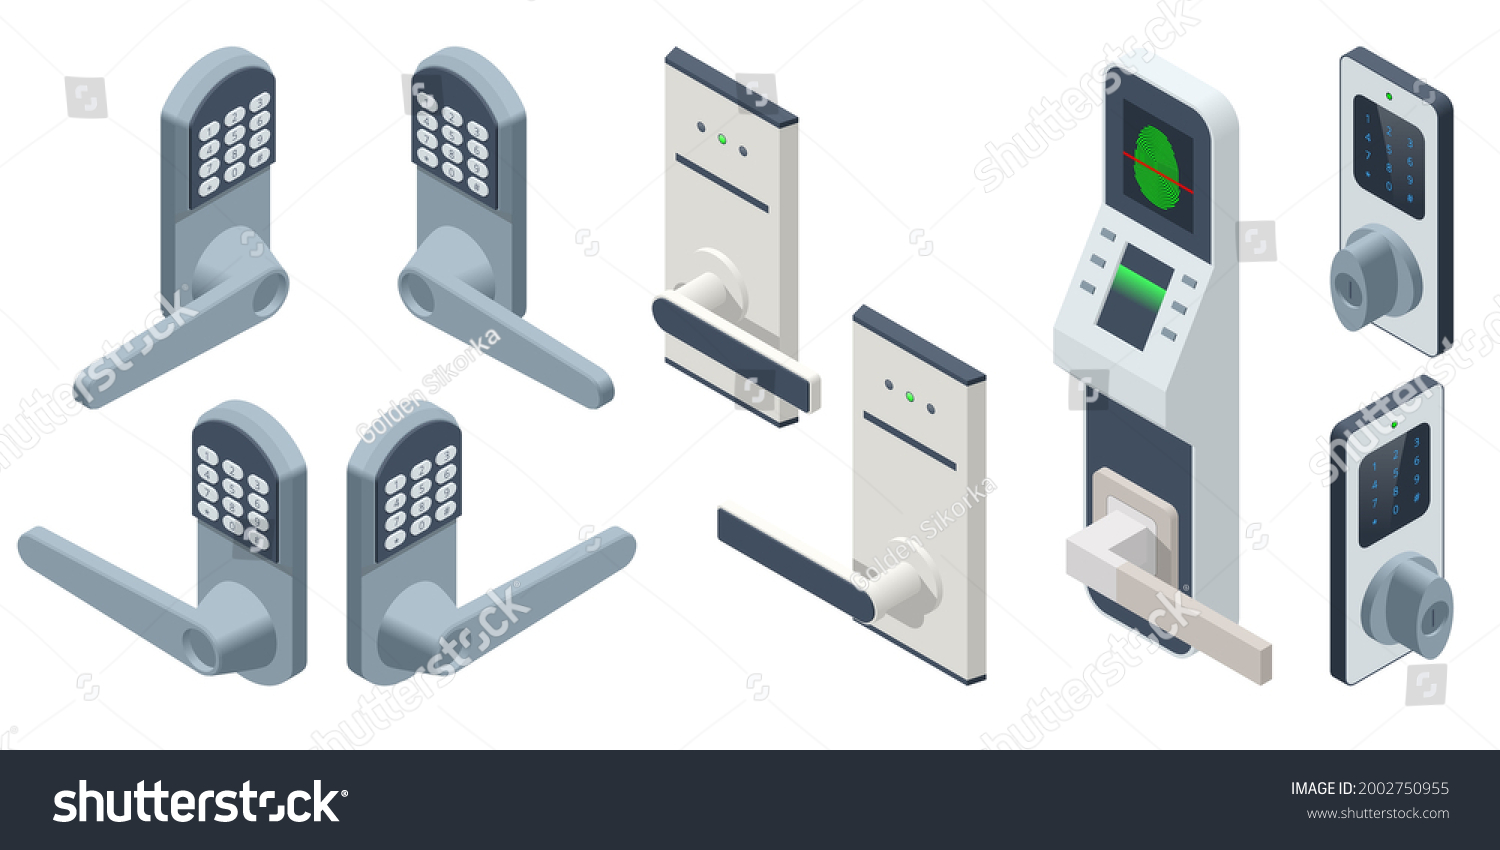 SVG of Isometric Door electronic access control system machine. Biometric access control machine, Electronic security door lock icon with keypad and fingerprint reader. svg